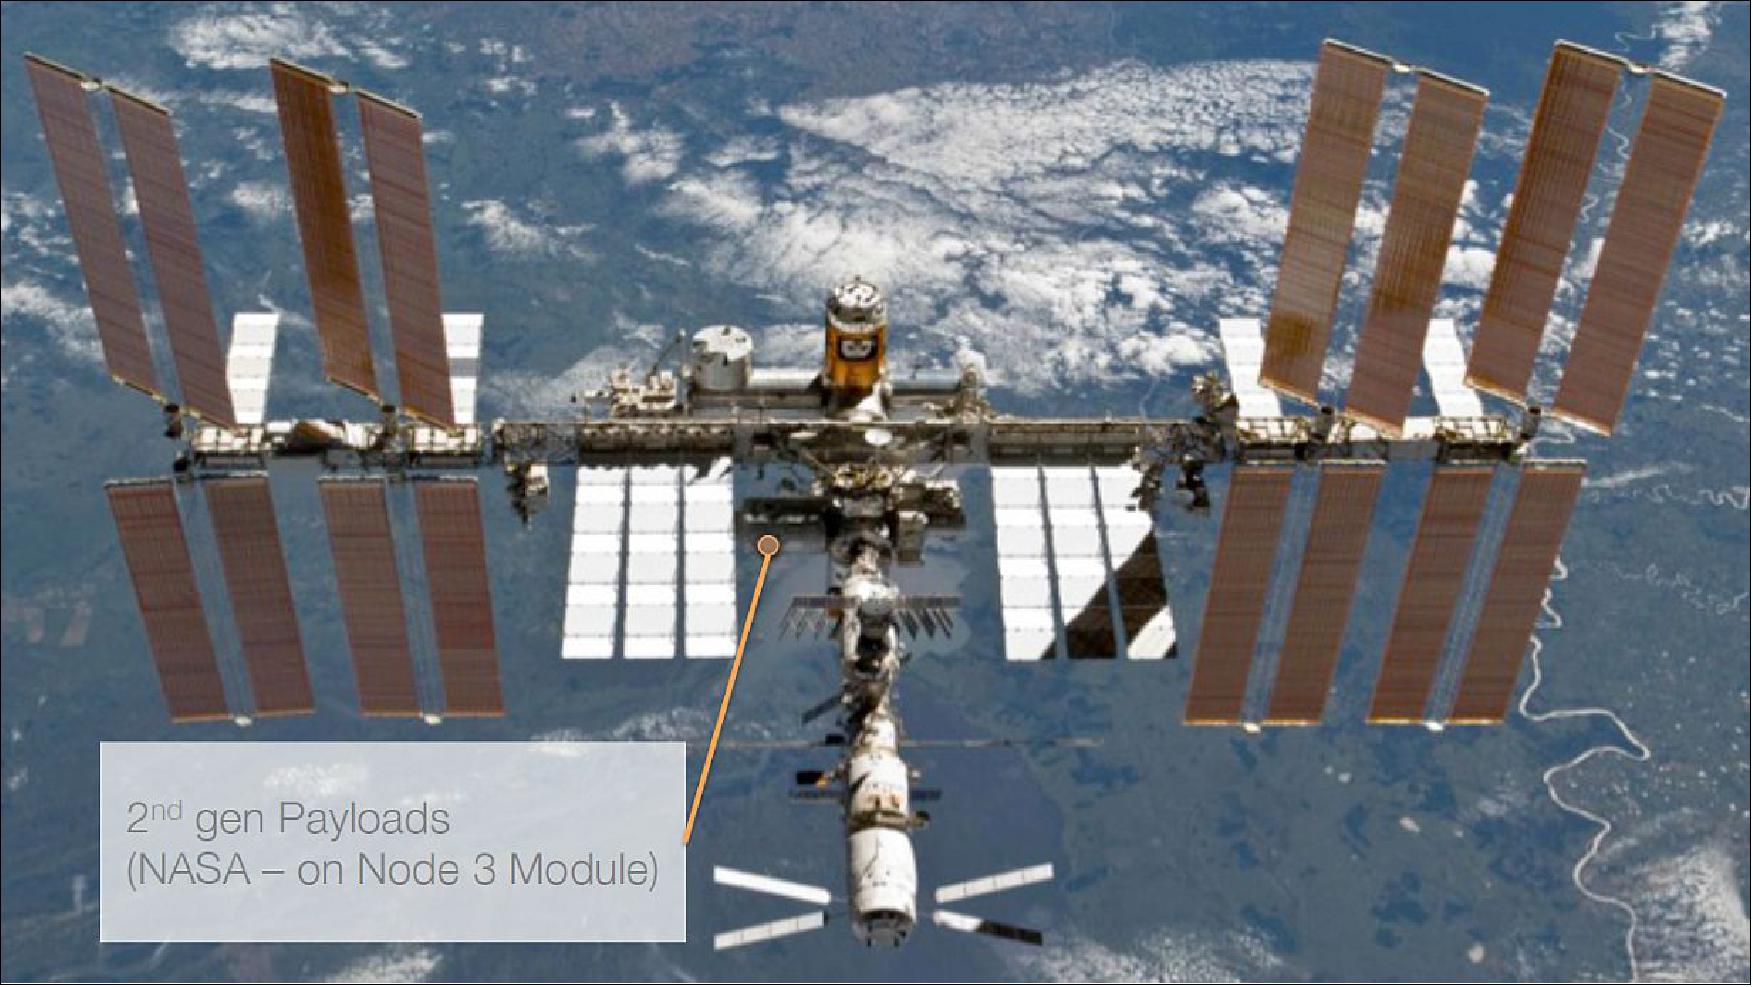 Figure 15: Location of the UrtheCast second-generation payloads on the U.S. Tranquility module -node 3 of the ISS (image credit: UrtheCast, Ref. 15)